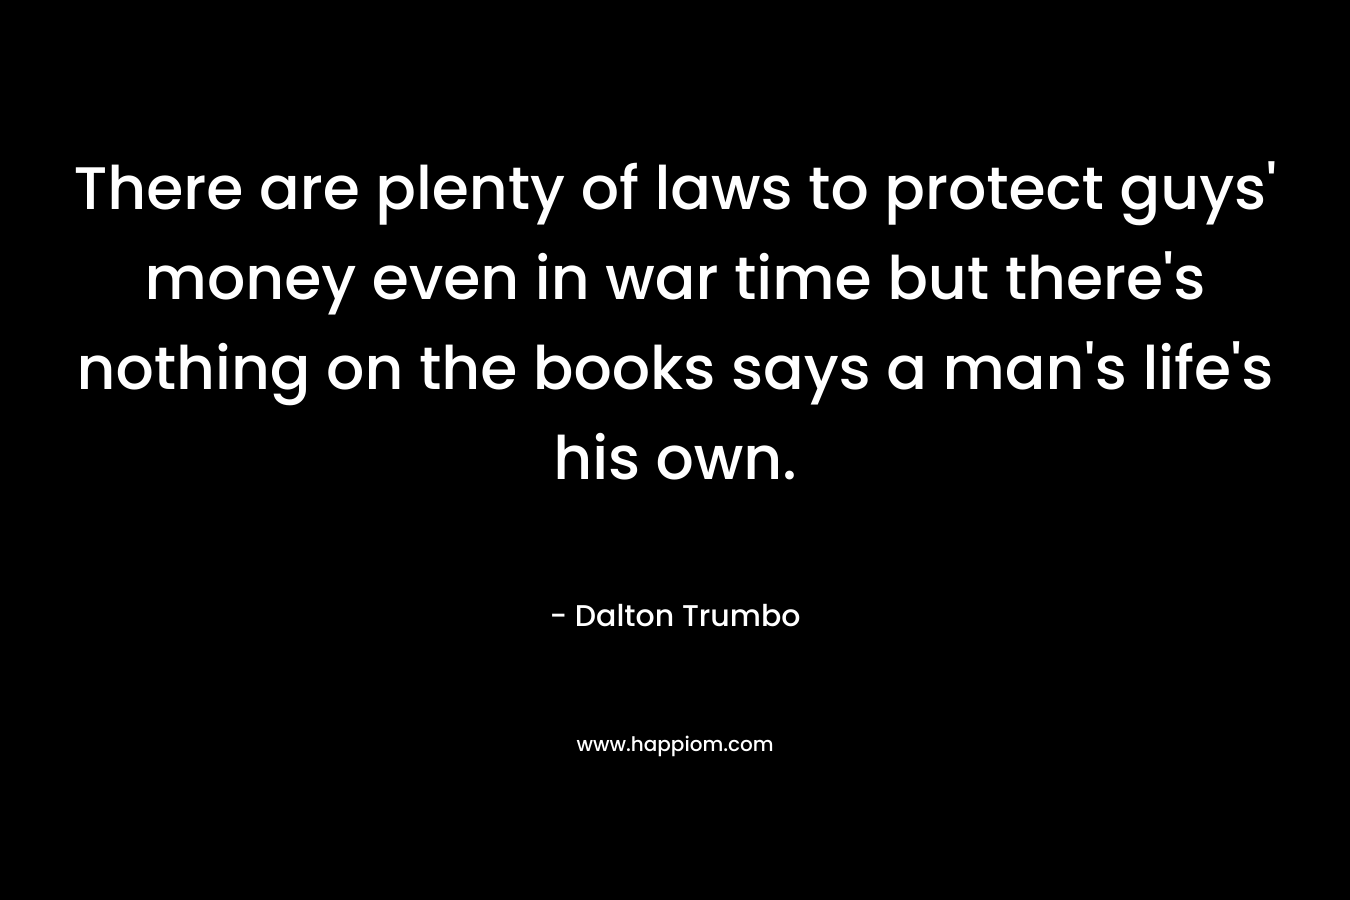 There are plenty of laws to protect guys' money even in war time but there's nothing on the books says a man's life's his own.